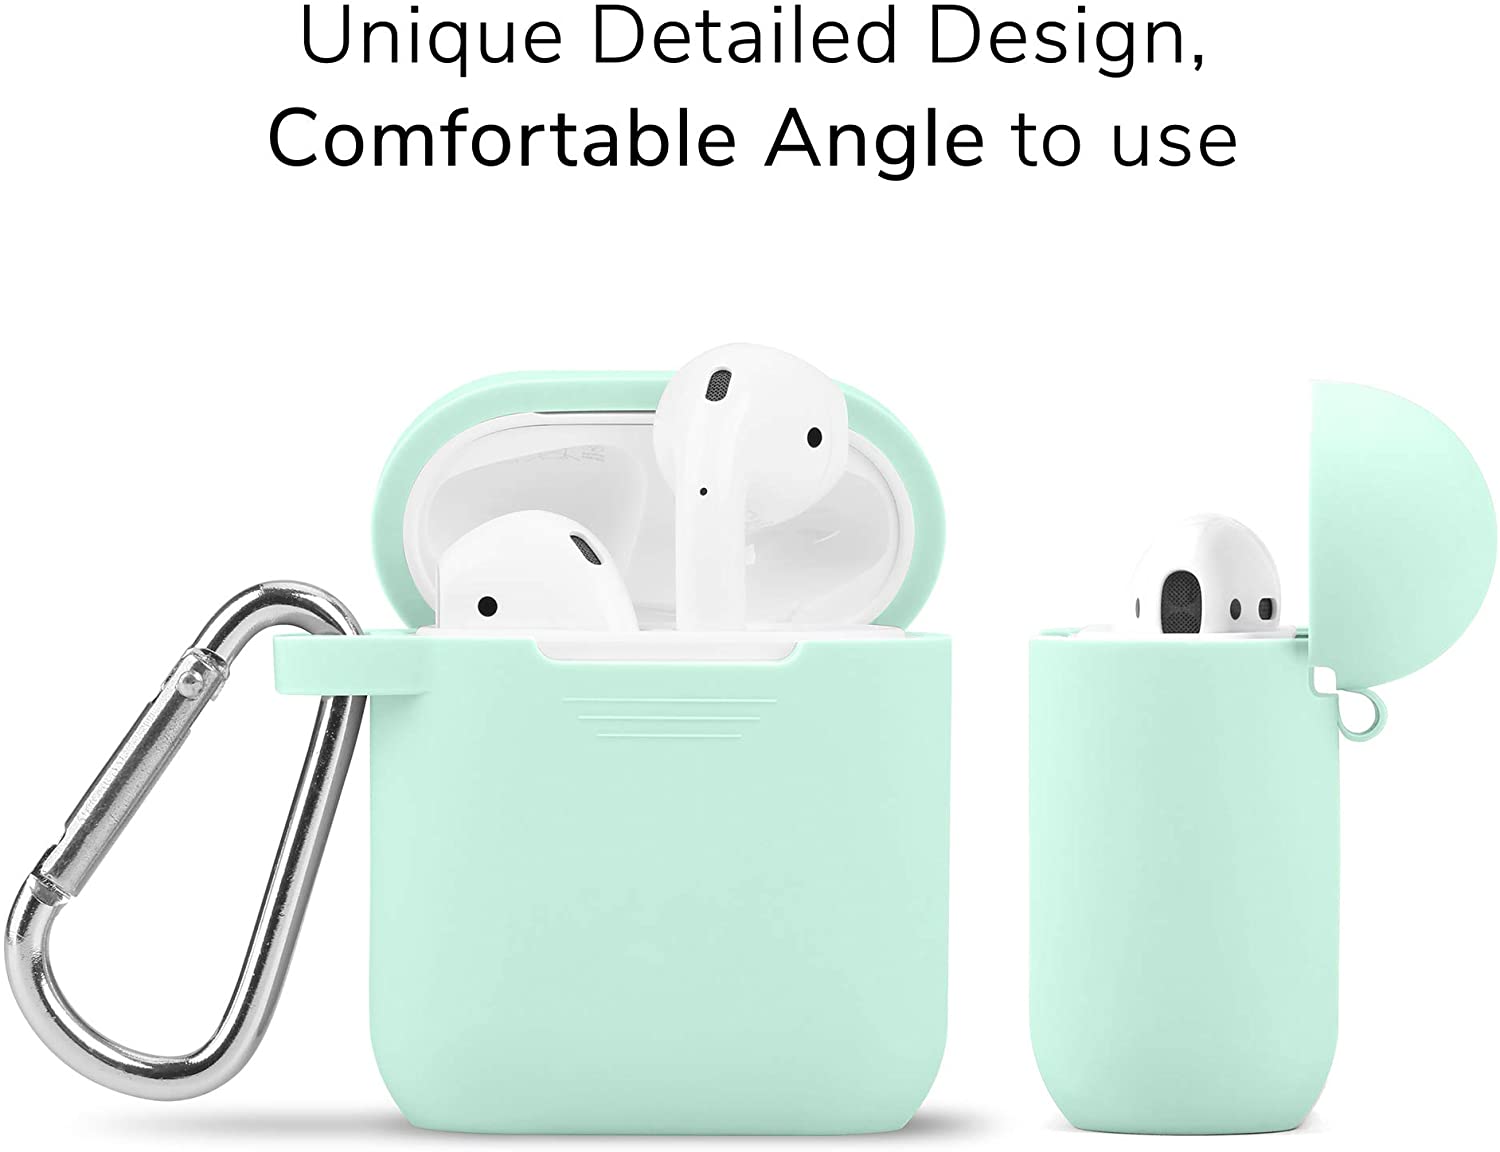 AirPods Case [Front LED Visible] GMYLE Silicone Protective Shockproof Earbuds Case Cover Skin with Keychain Kit Set Compatible for Apple AirPods 1 & 2 (Pastel Green) - image 5 of 8